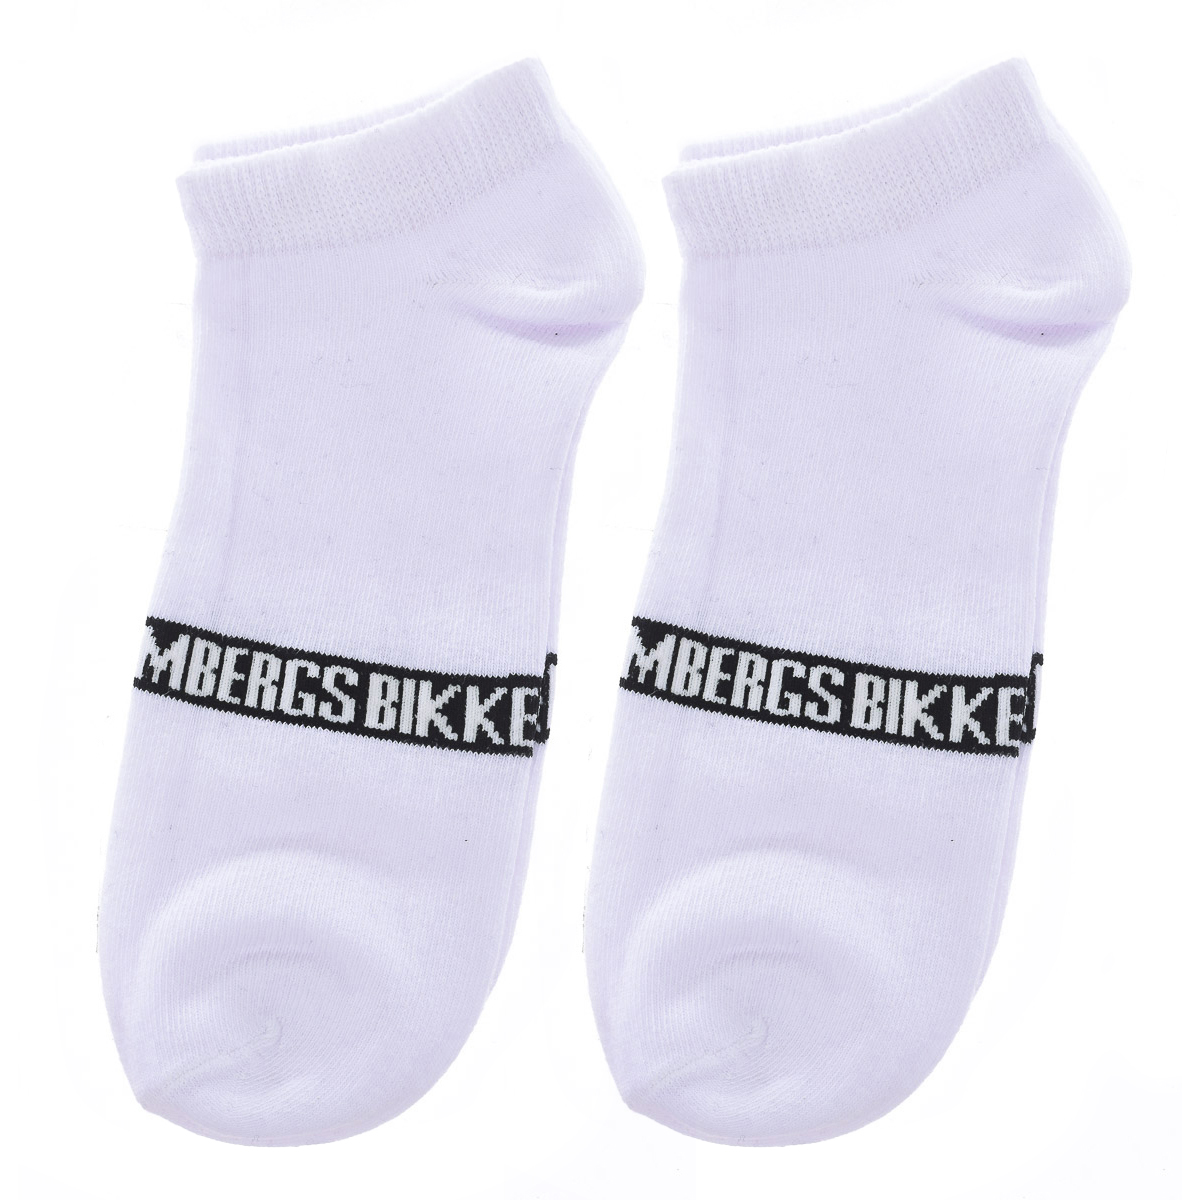 Pack-2 Calcetines Invisible Caña Corta Bk079 Hombre | Sport Zone MKP